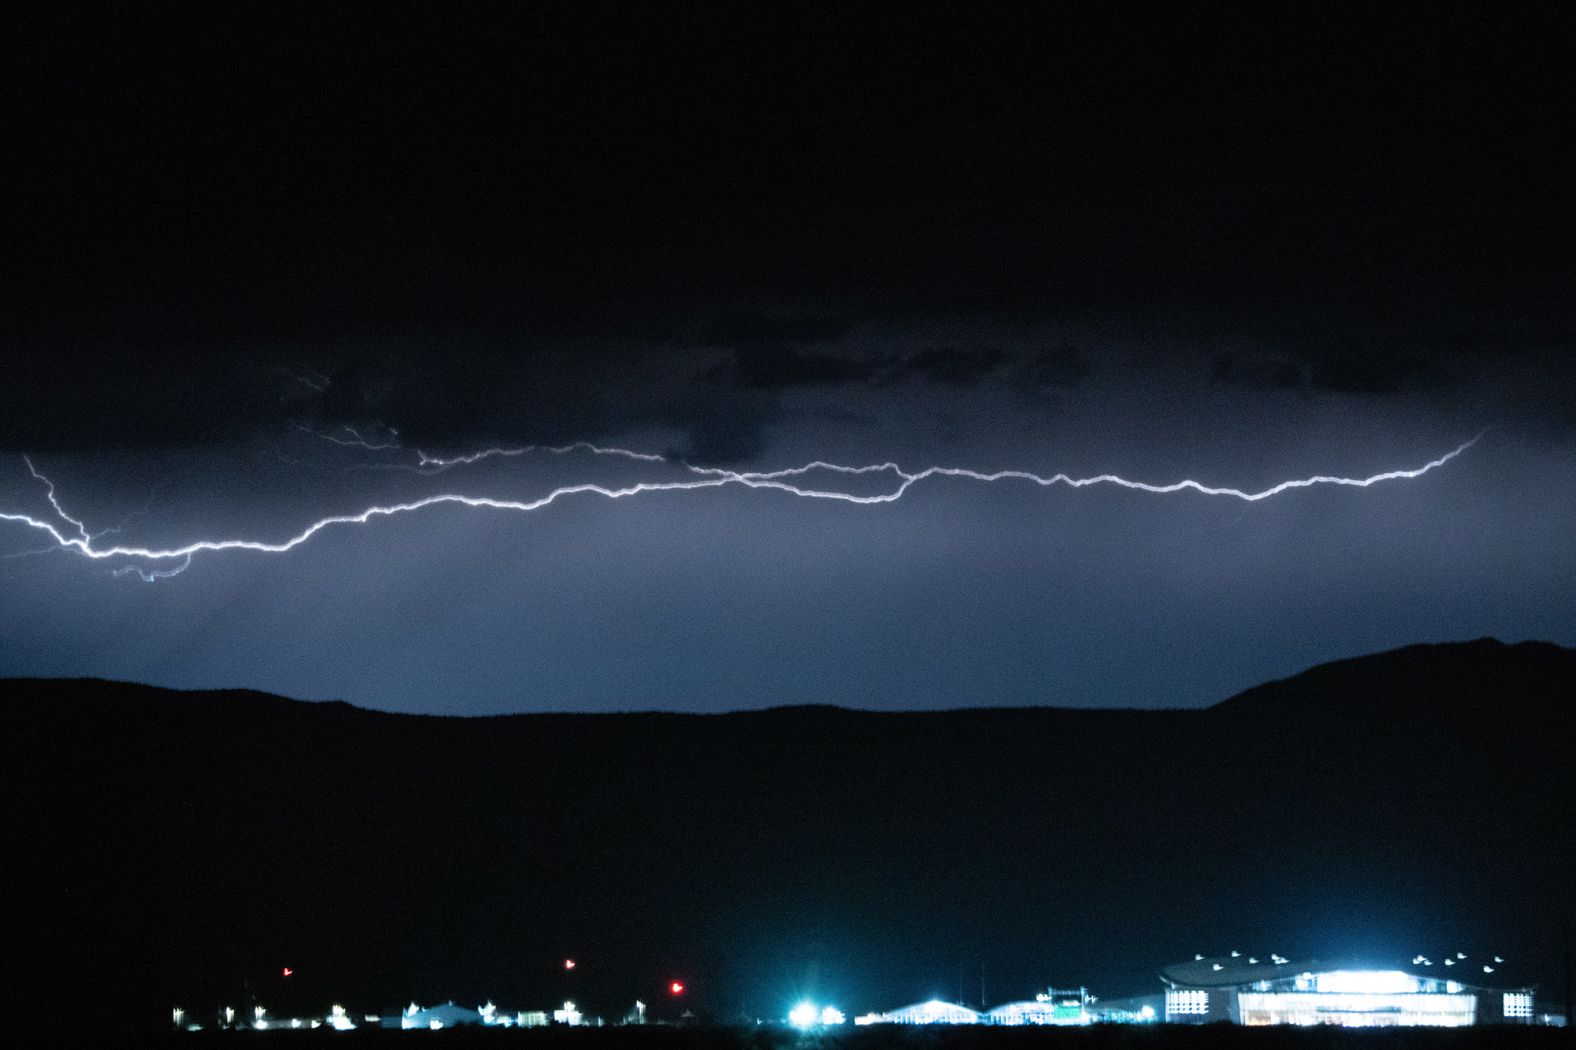 Lightning flashes over Spaceport America on Saturday, July 10. Virgin Galactic's livestream of the launch was delayed 90 minutes from its originally scheduled time thanks to high winds the night before.